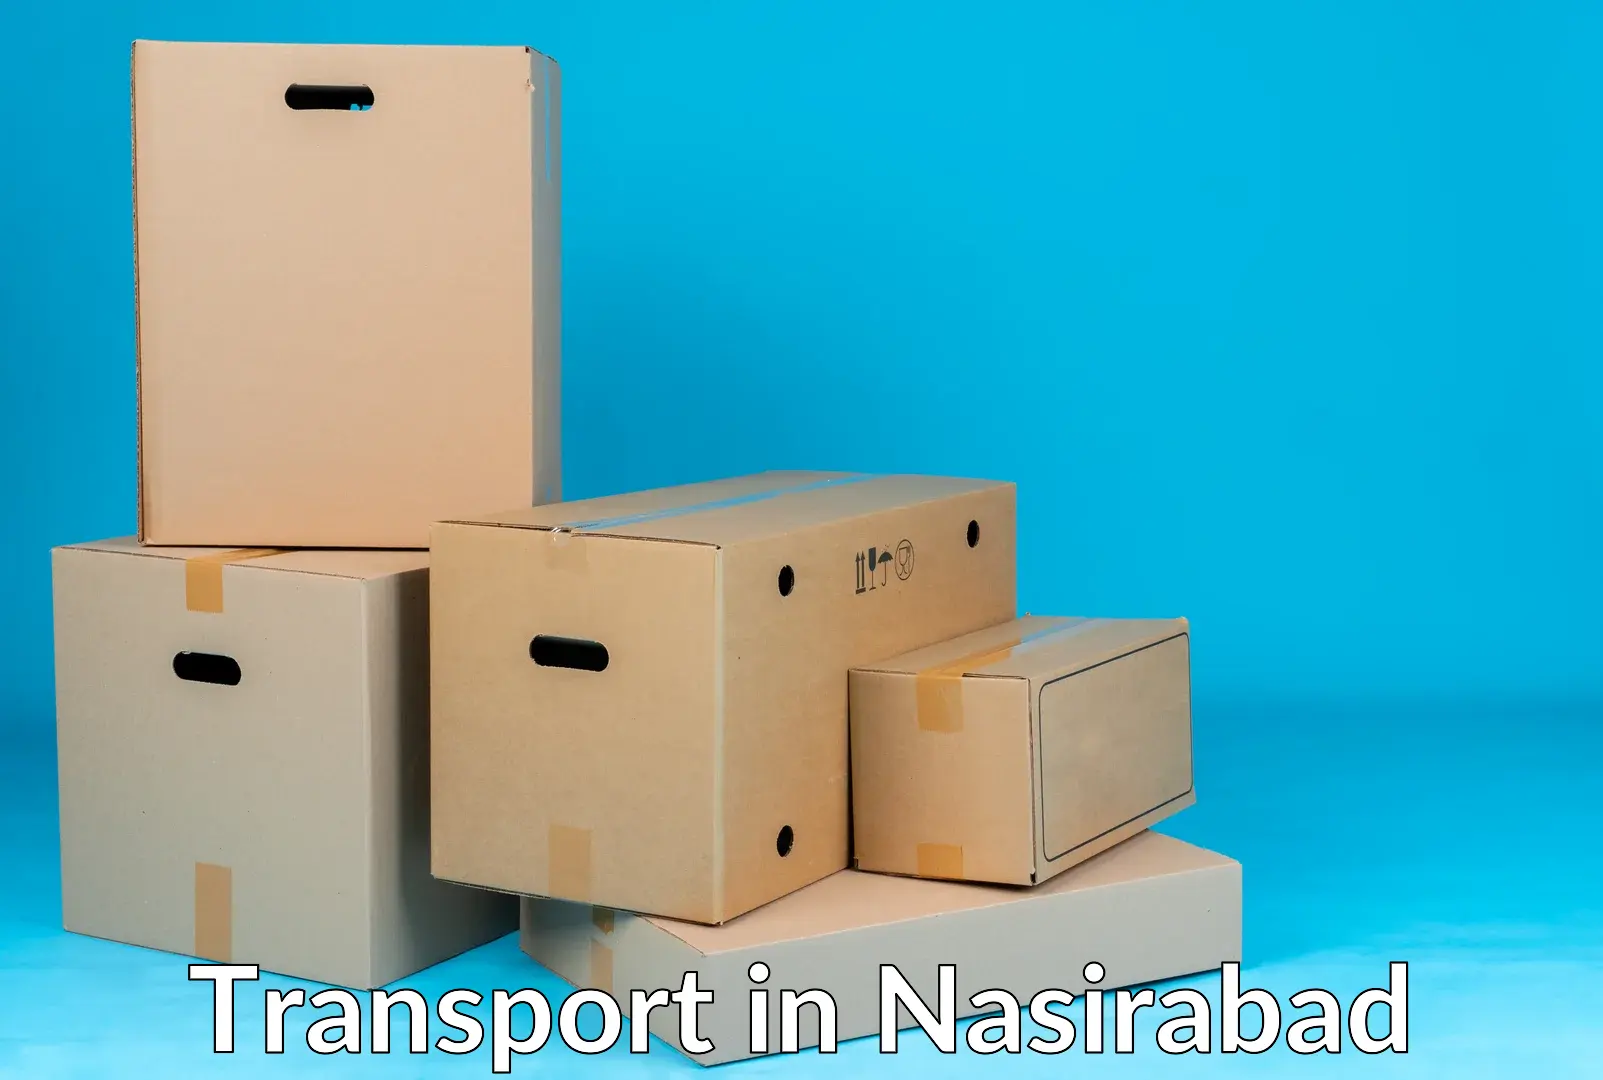 Container transportation services in Nasirabad